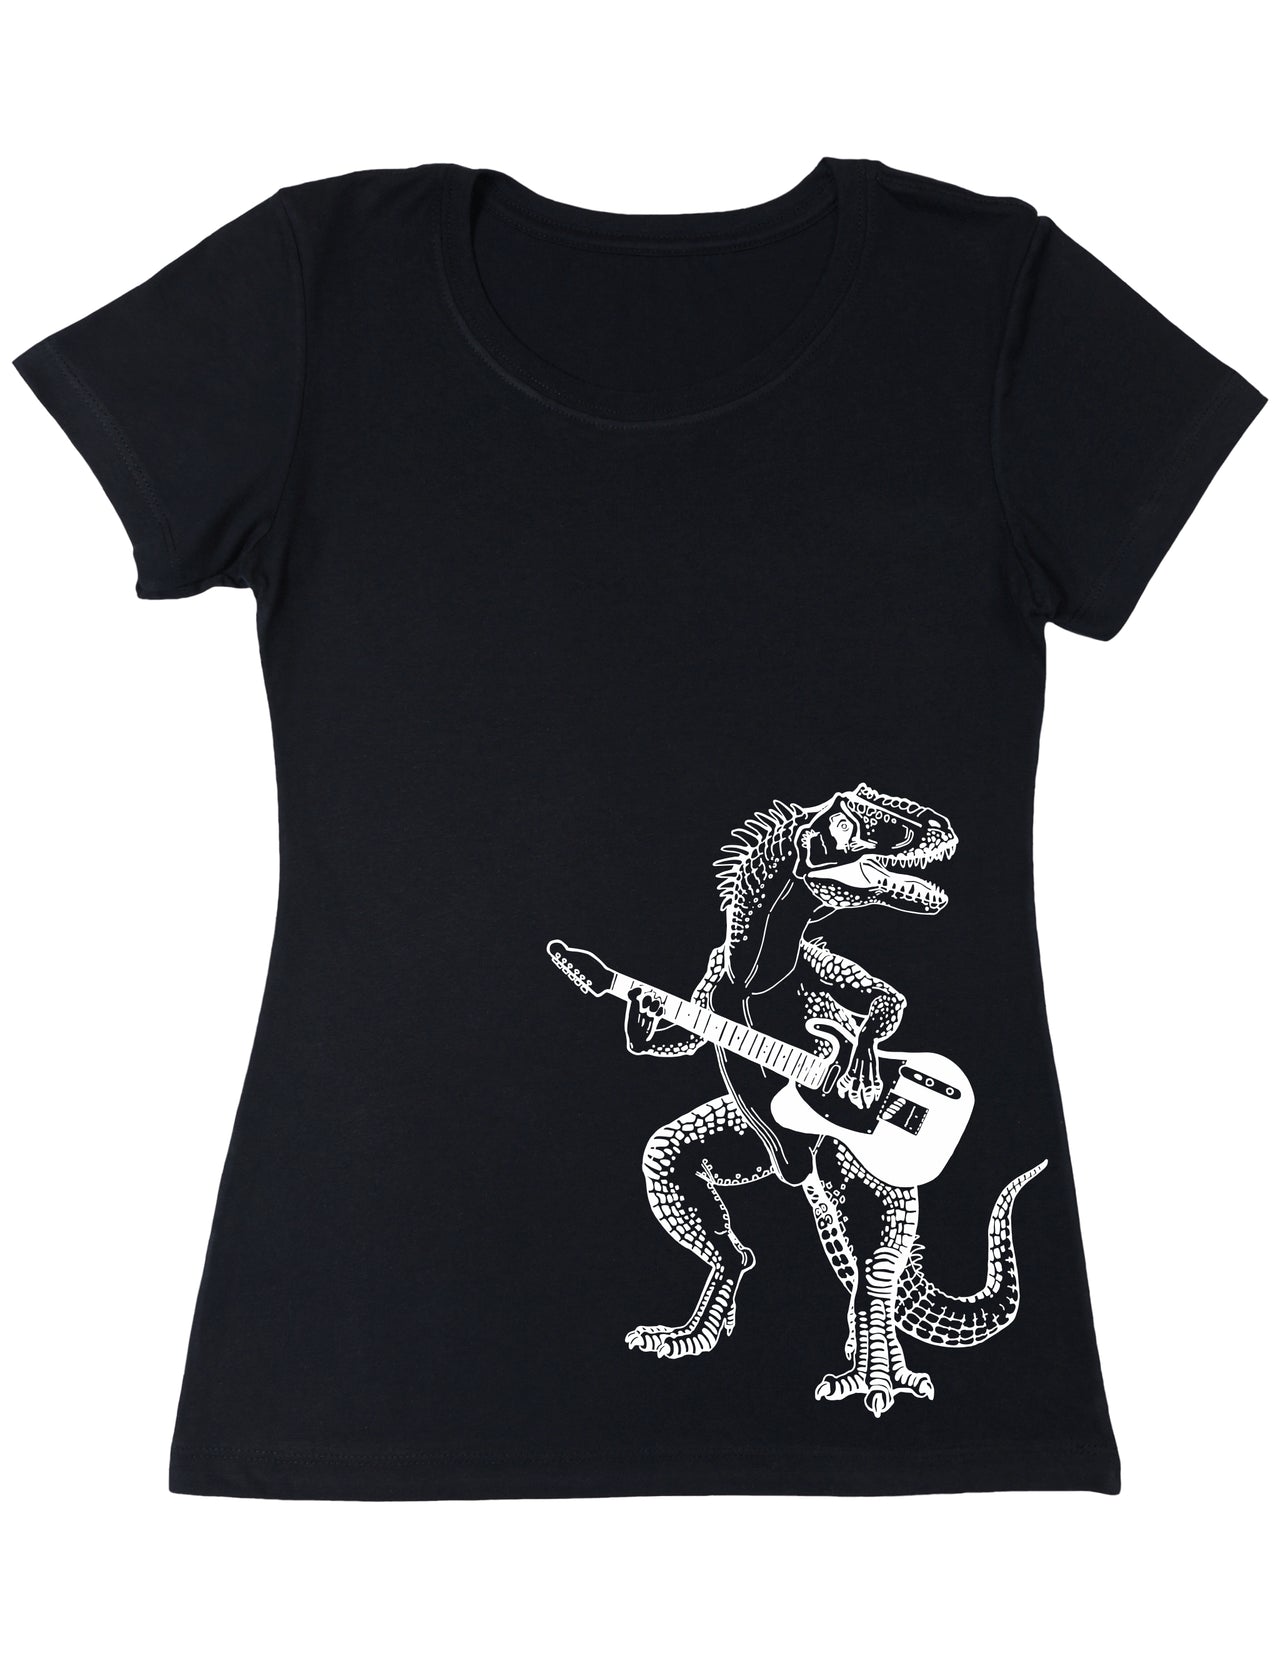 SEEMBO Dinosaur Playing Guitar Funny Guitarist Misician Women Poly-Cotton T-Shirt Side Print